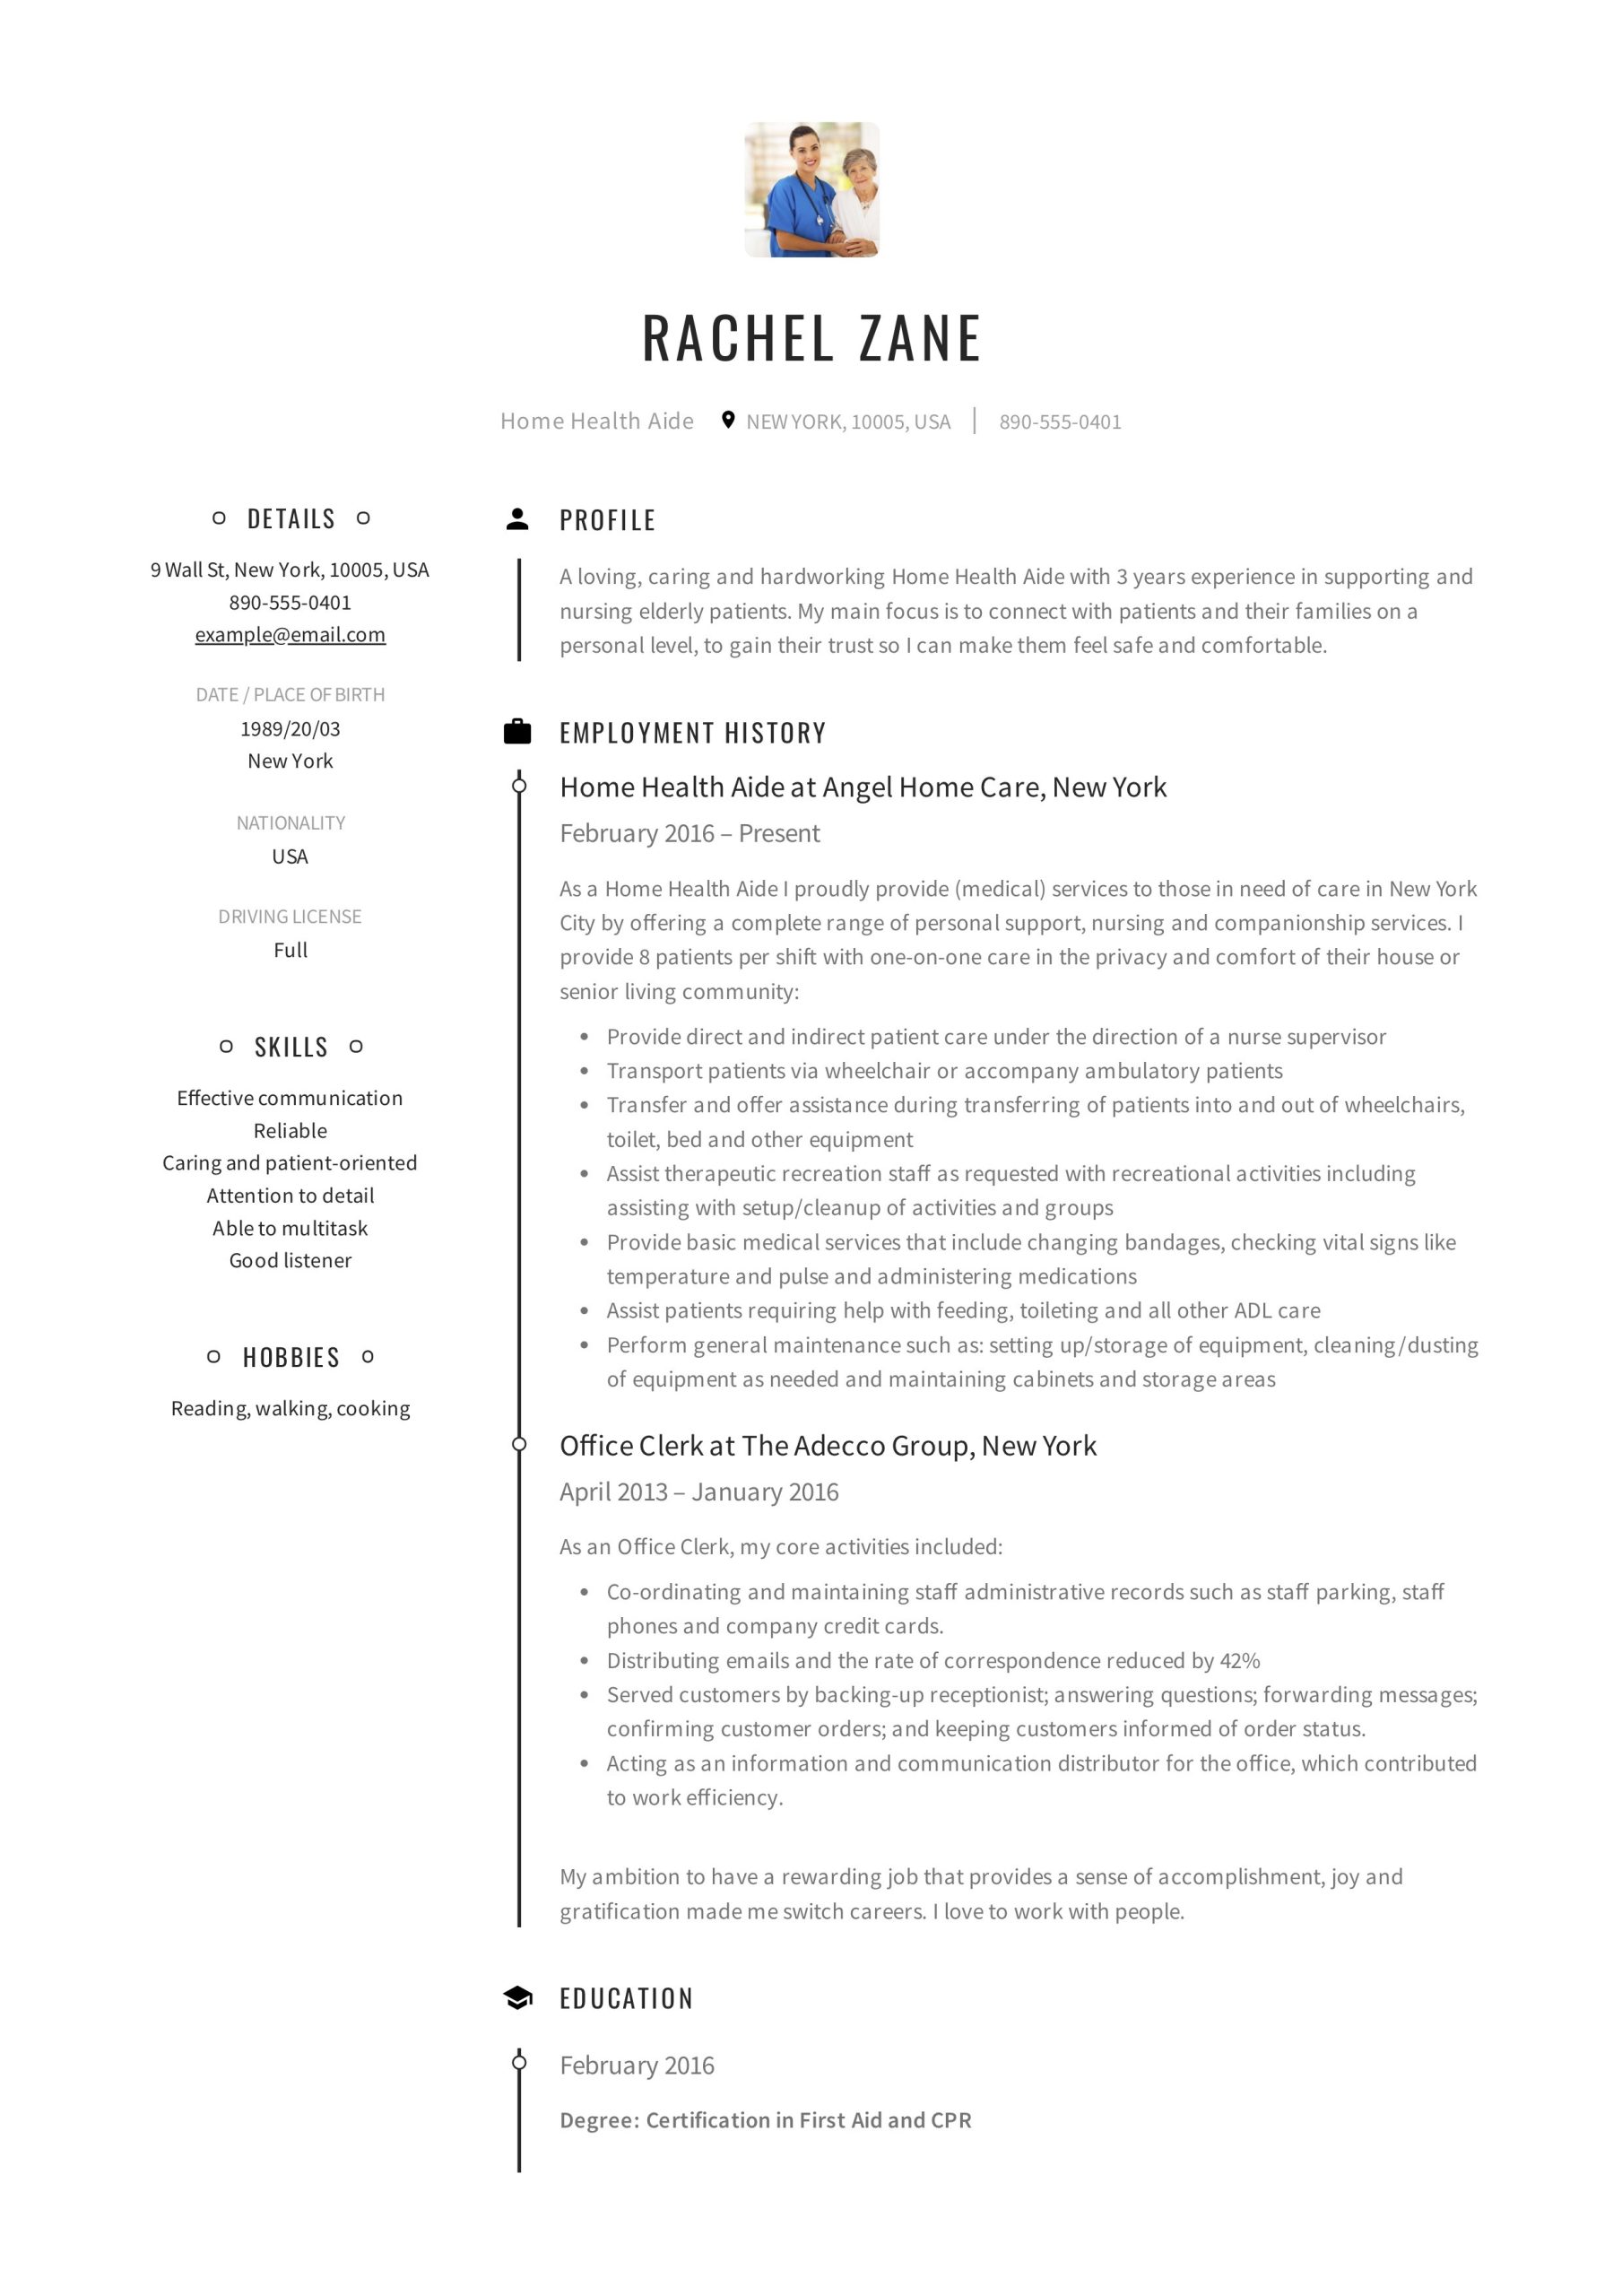 Home Health Aide Resume Summary Sample Home Health Aide Resume Guide 12 Examples Pdf